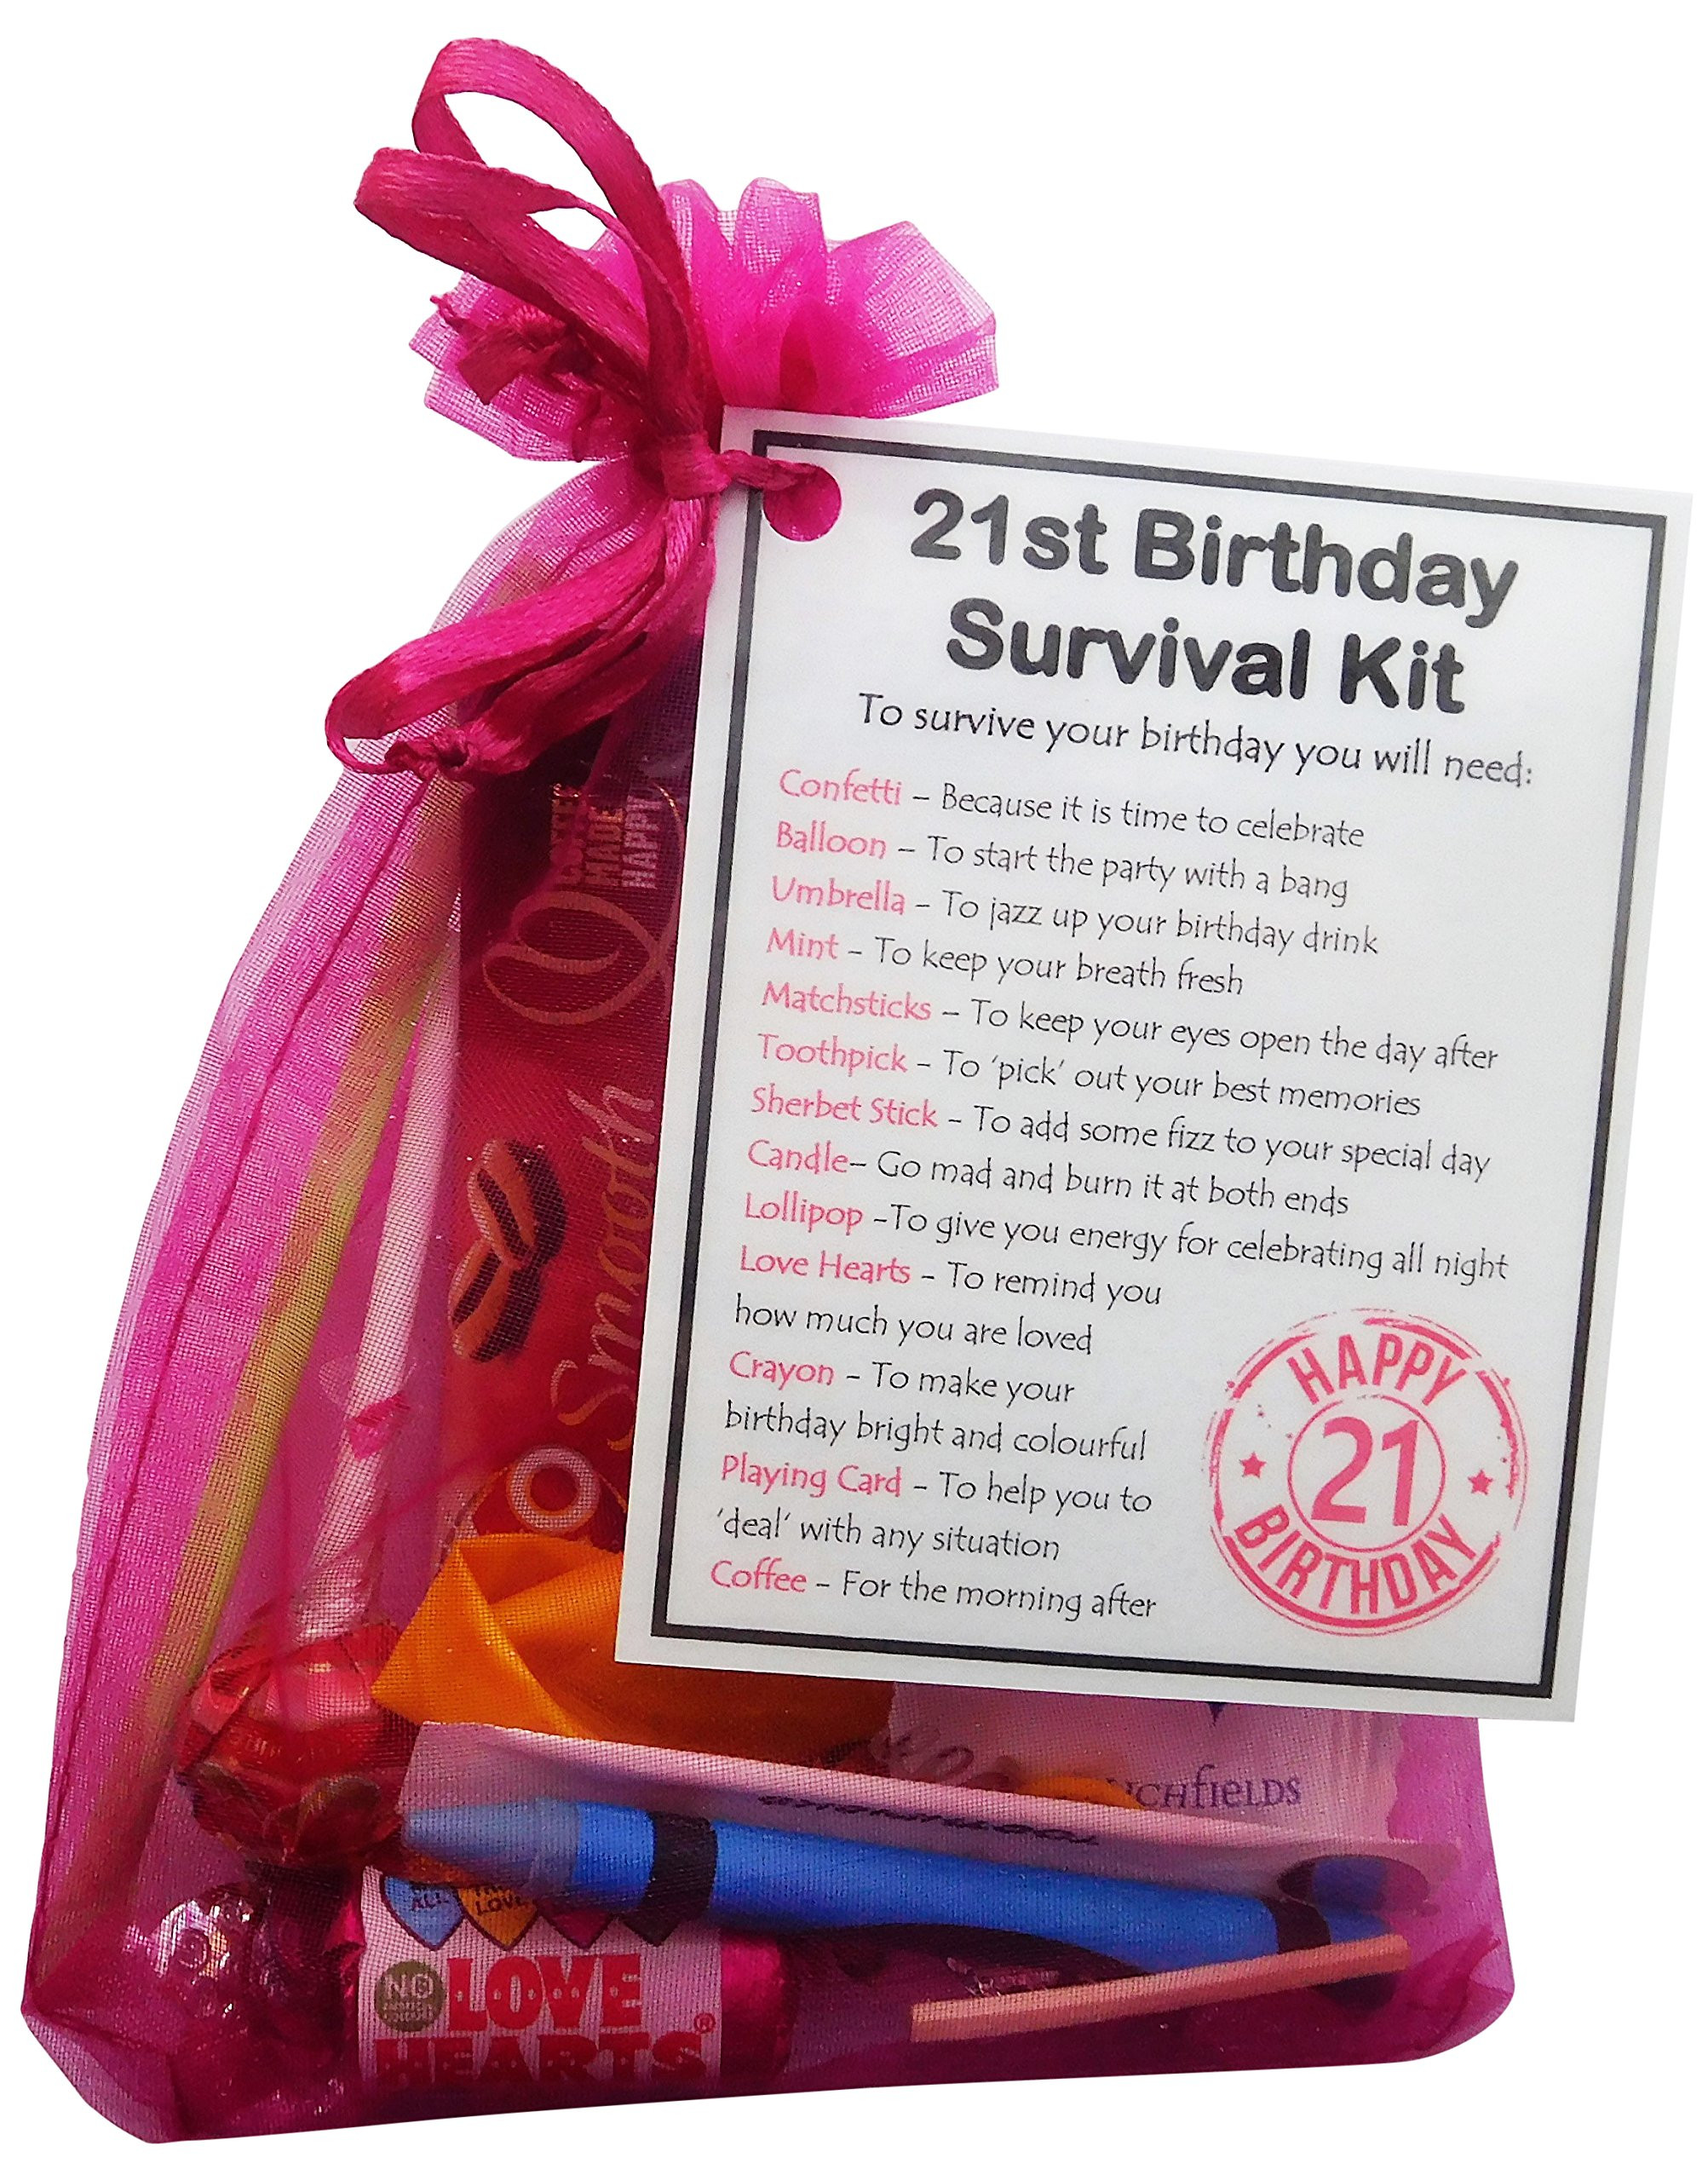 Creative 21St Birthday Gift Ideas For Her
 21st Birthday Gifts for Her Keepsake Amazon